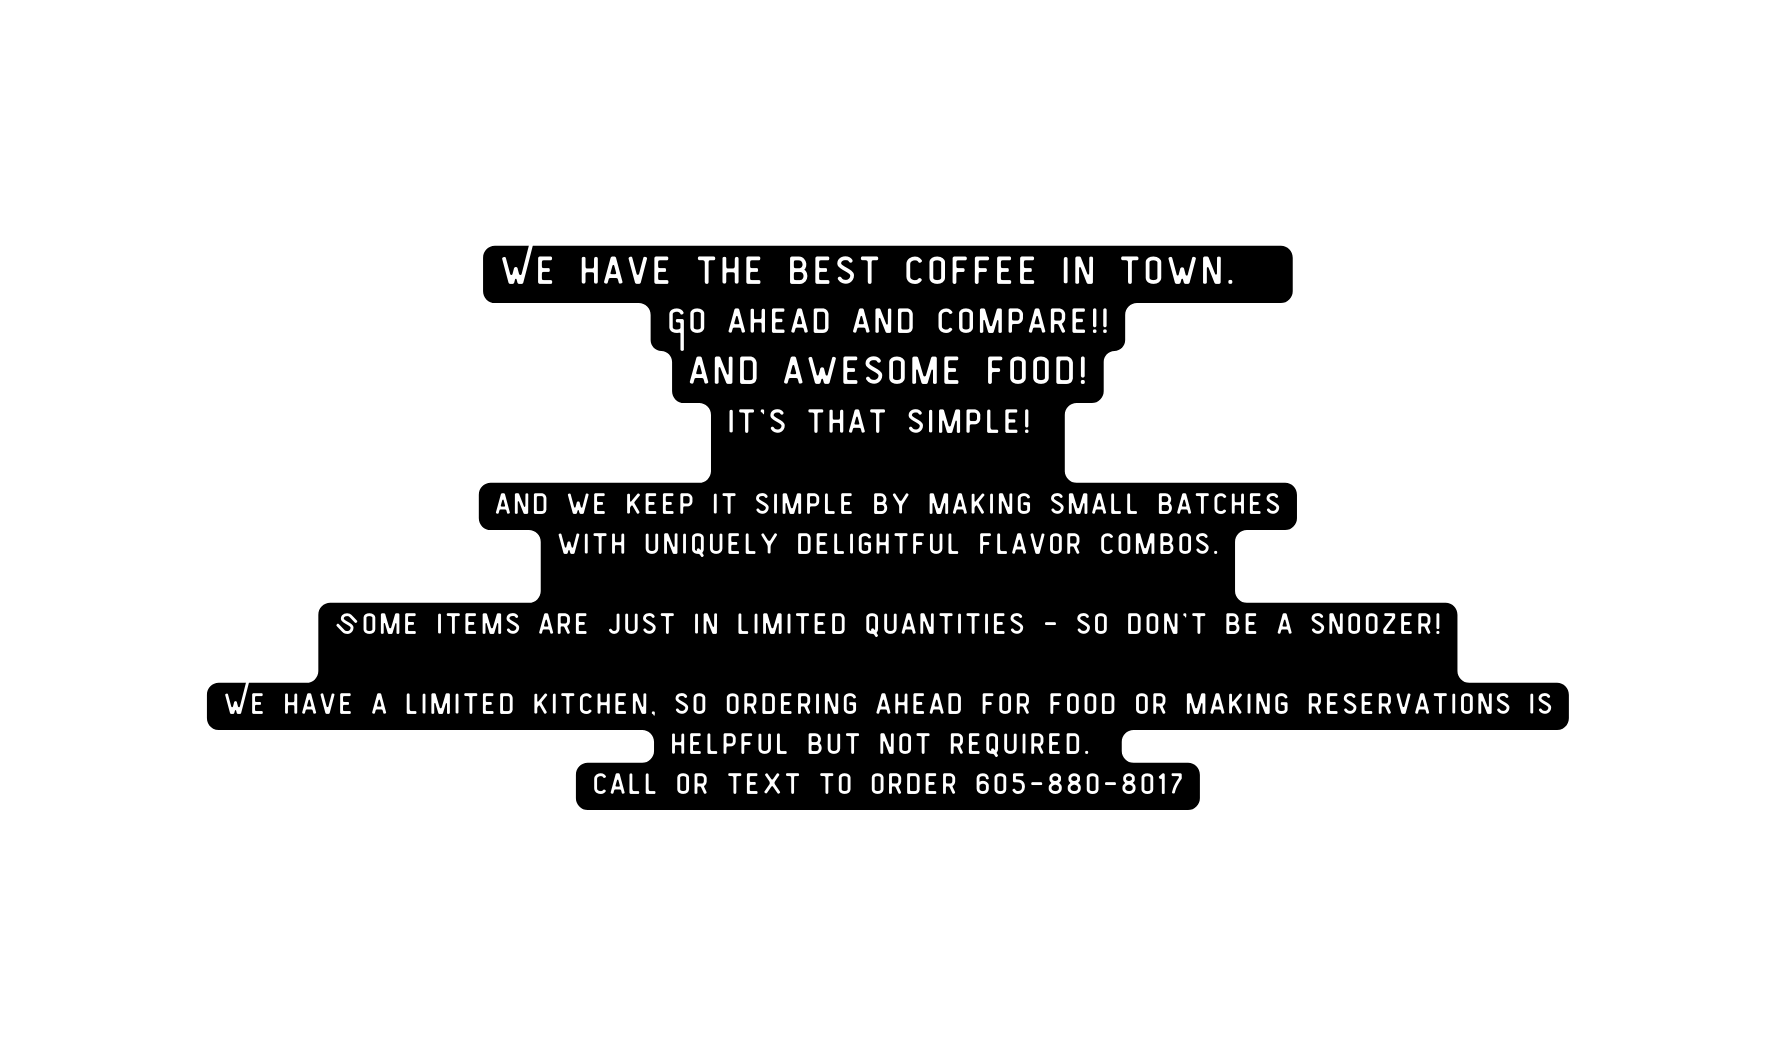 We have the best coffee in town Go ahead and compare and awesome food it s that simple and we keep it simple by making small batches with uniquely delightful flavor combos Some items are just in limited quantities so don t be a snoozer We have a limited kitchen so Ordering ahead for food or making reservations is helpful but not required call or text to order 605 880 8017